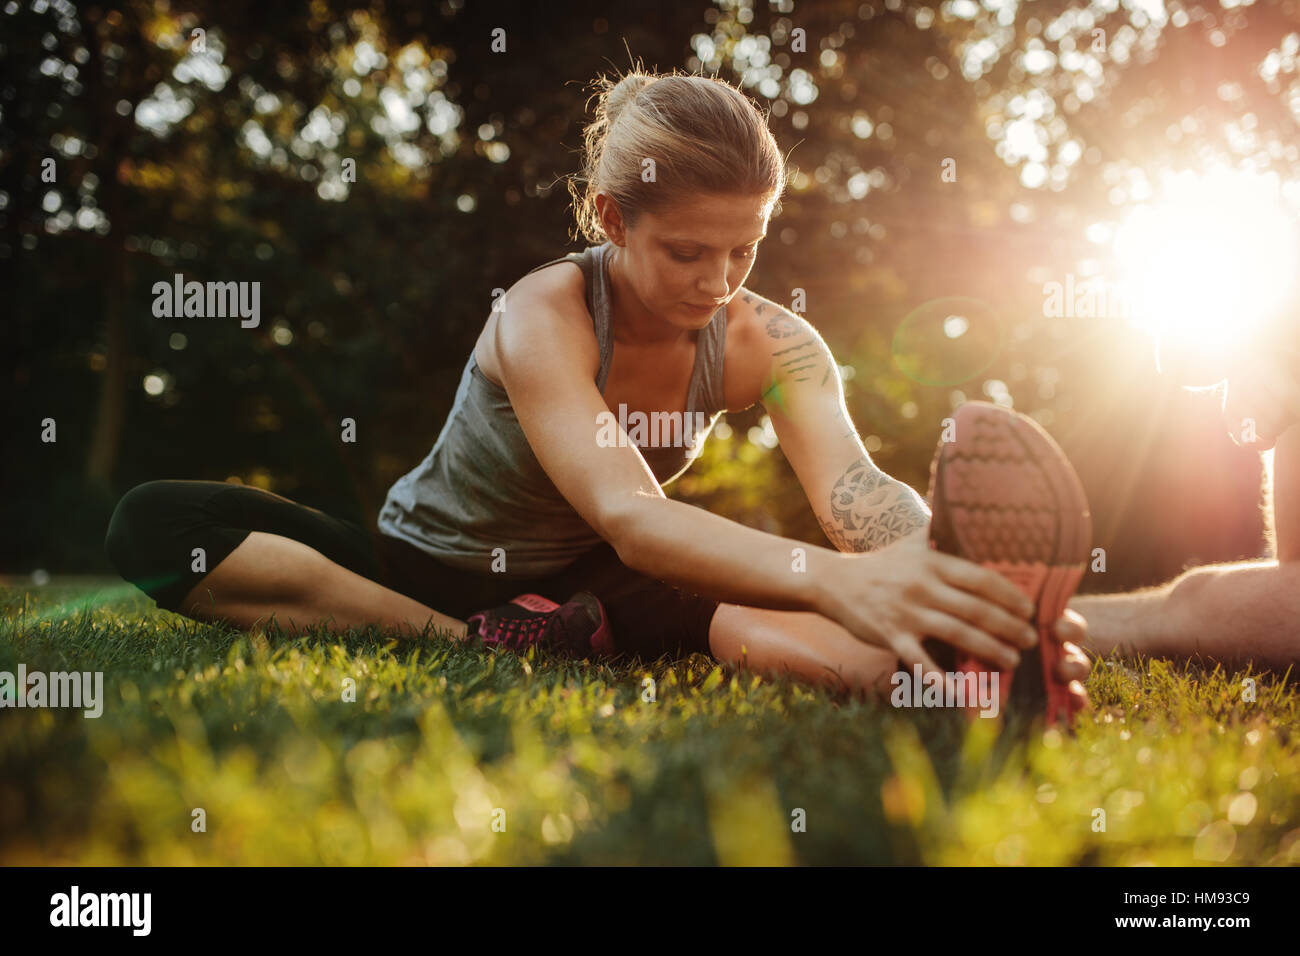 Healthy young woman exercising at park. Fit young woman doing training workout in morning. Stock Photo